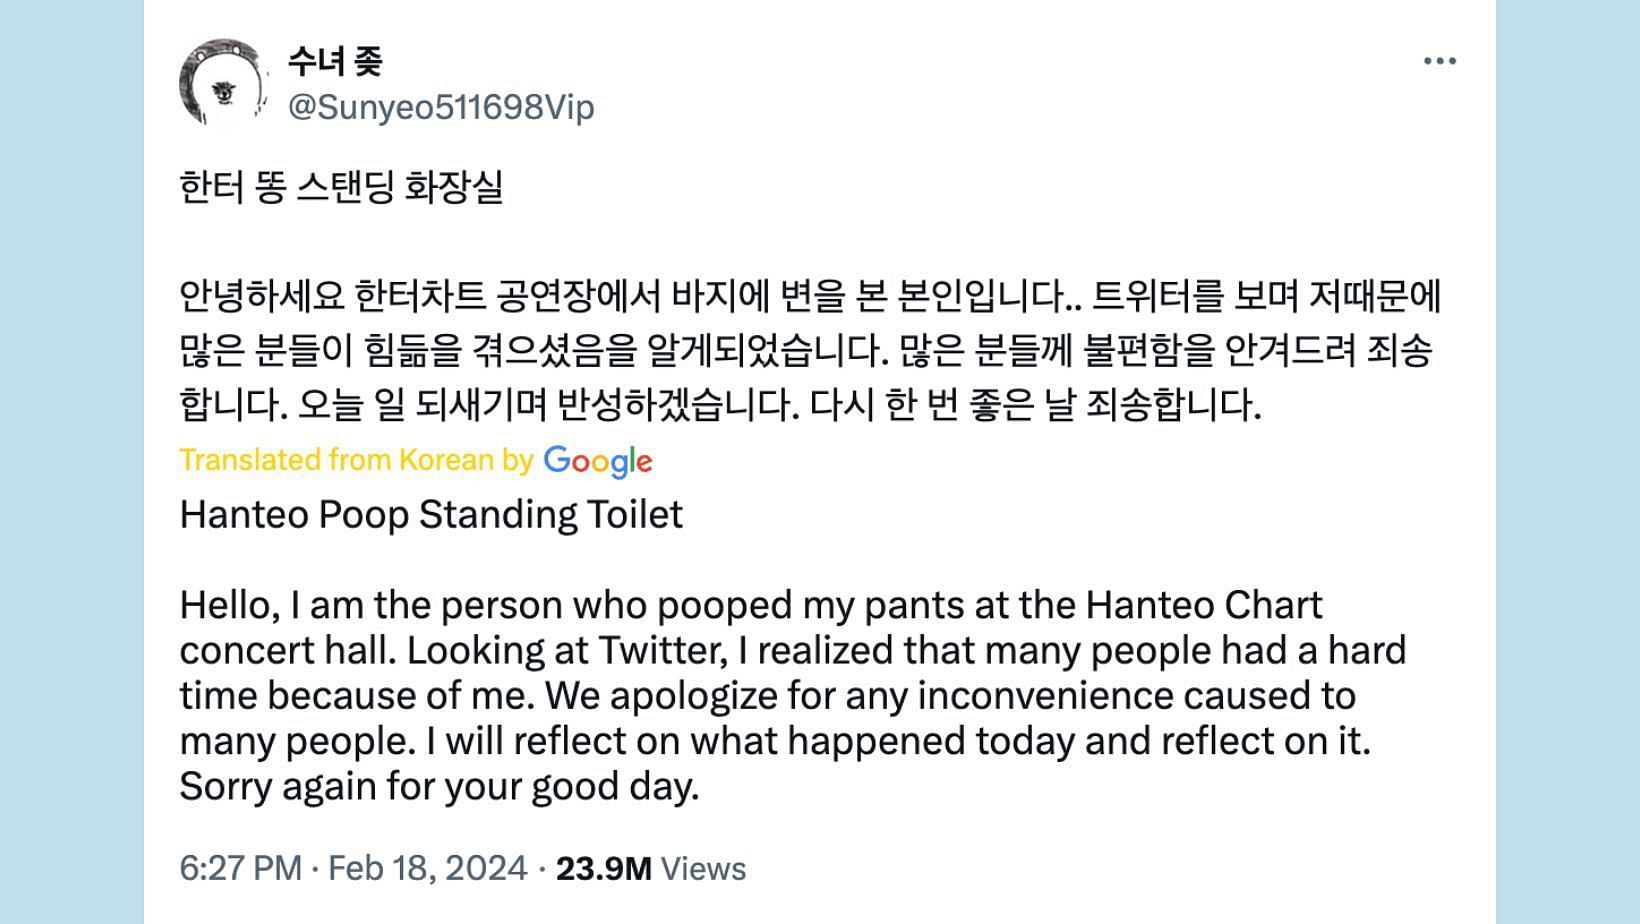 Fan who soiled in their trousers issued an apology on their X account. (Image via X/@Sunyeo511698Vip)